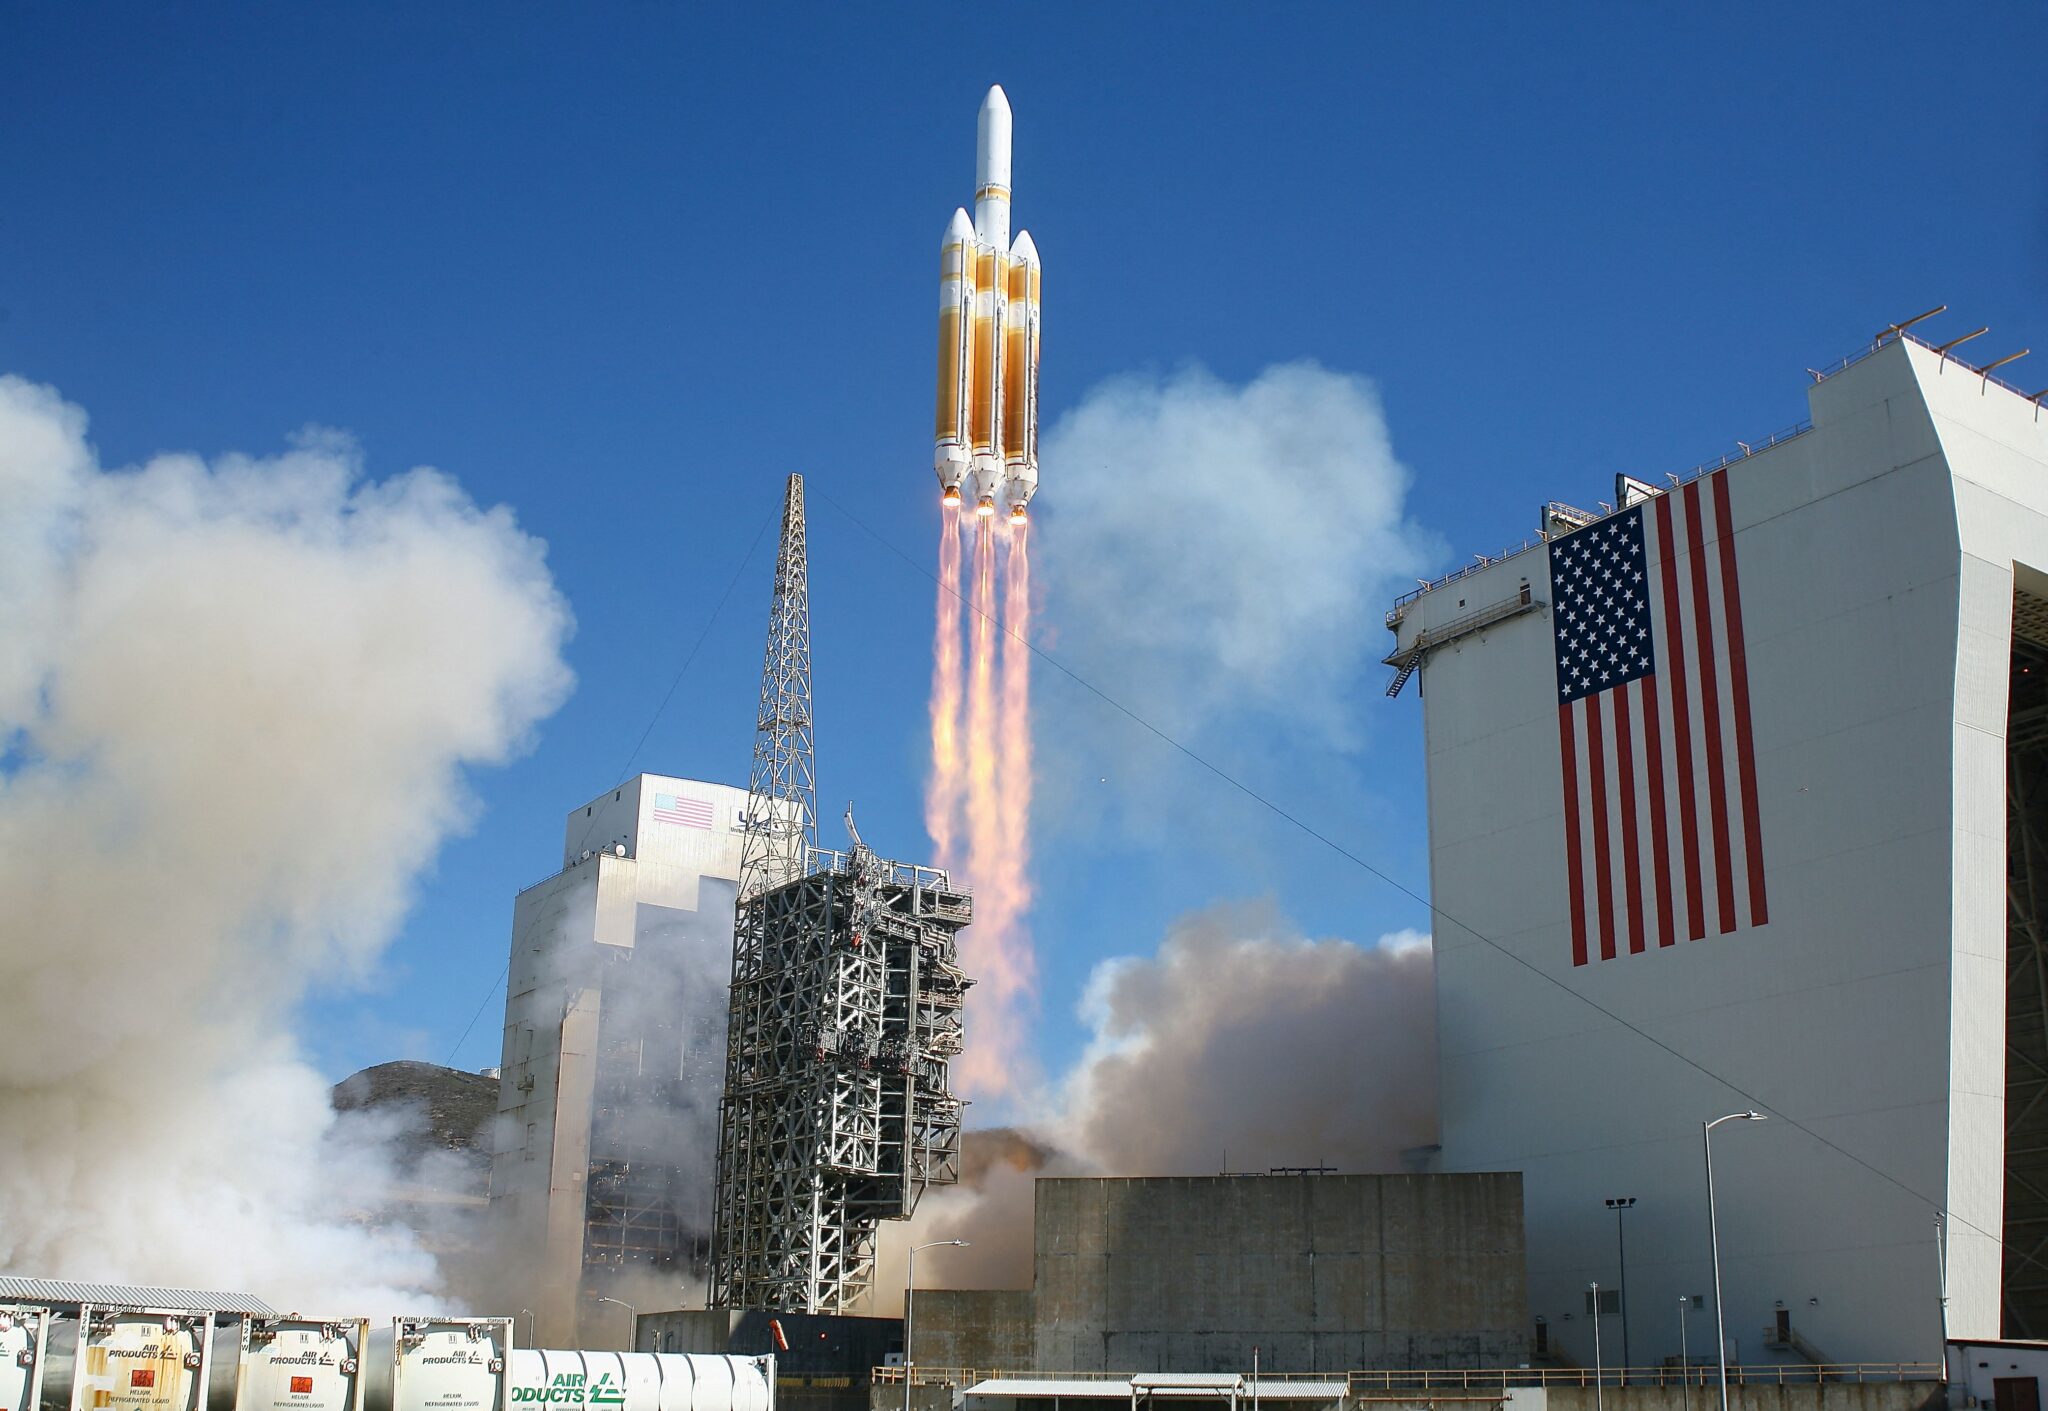 Everything on track for potentially historic launch at VAFB